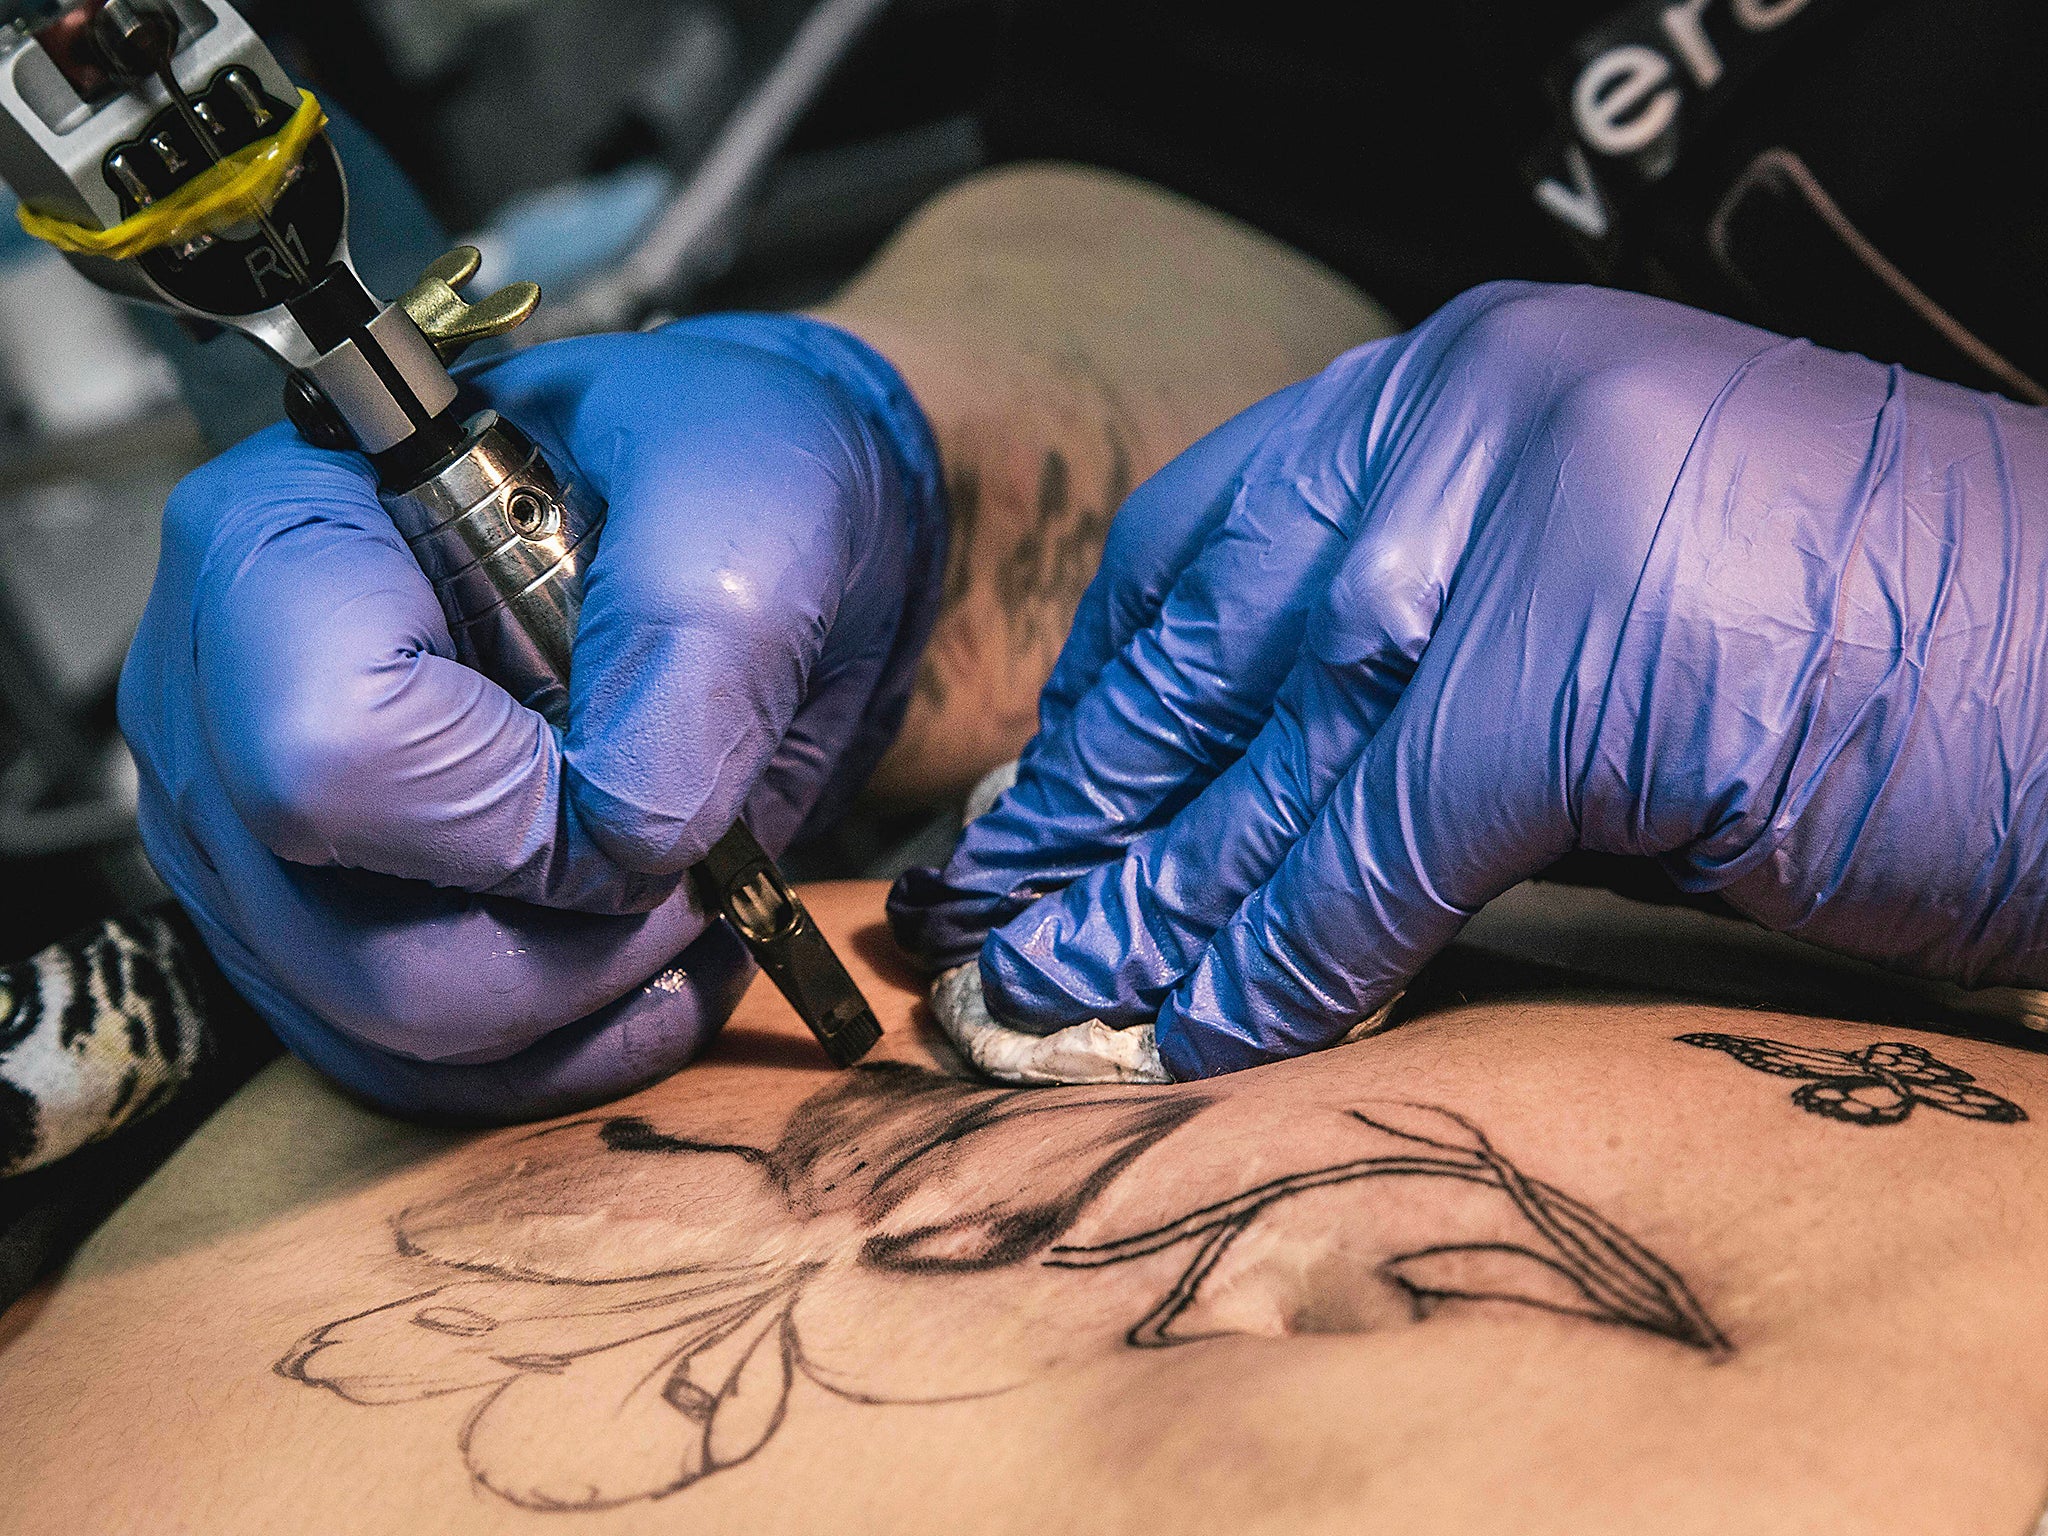 Can tattoos give you cancer?